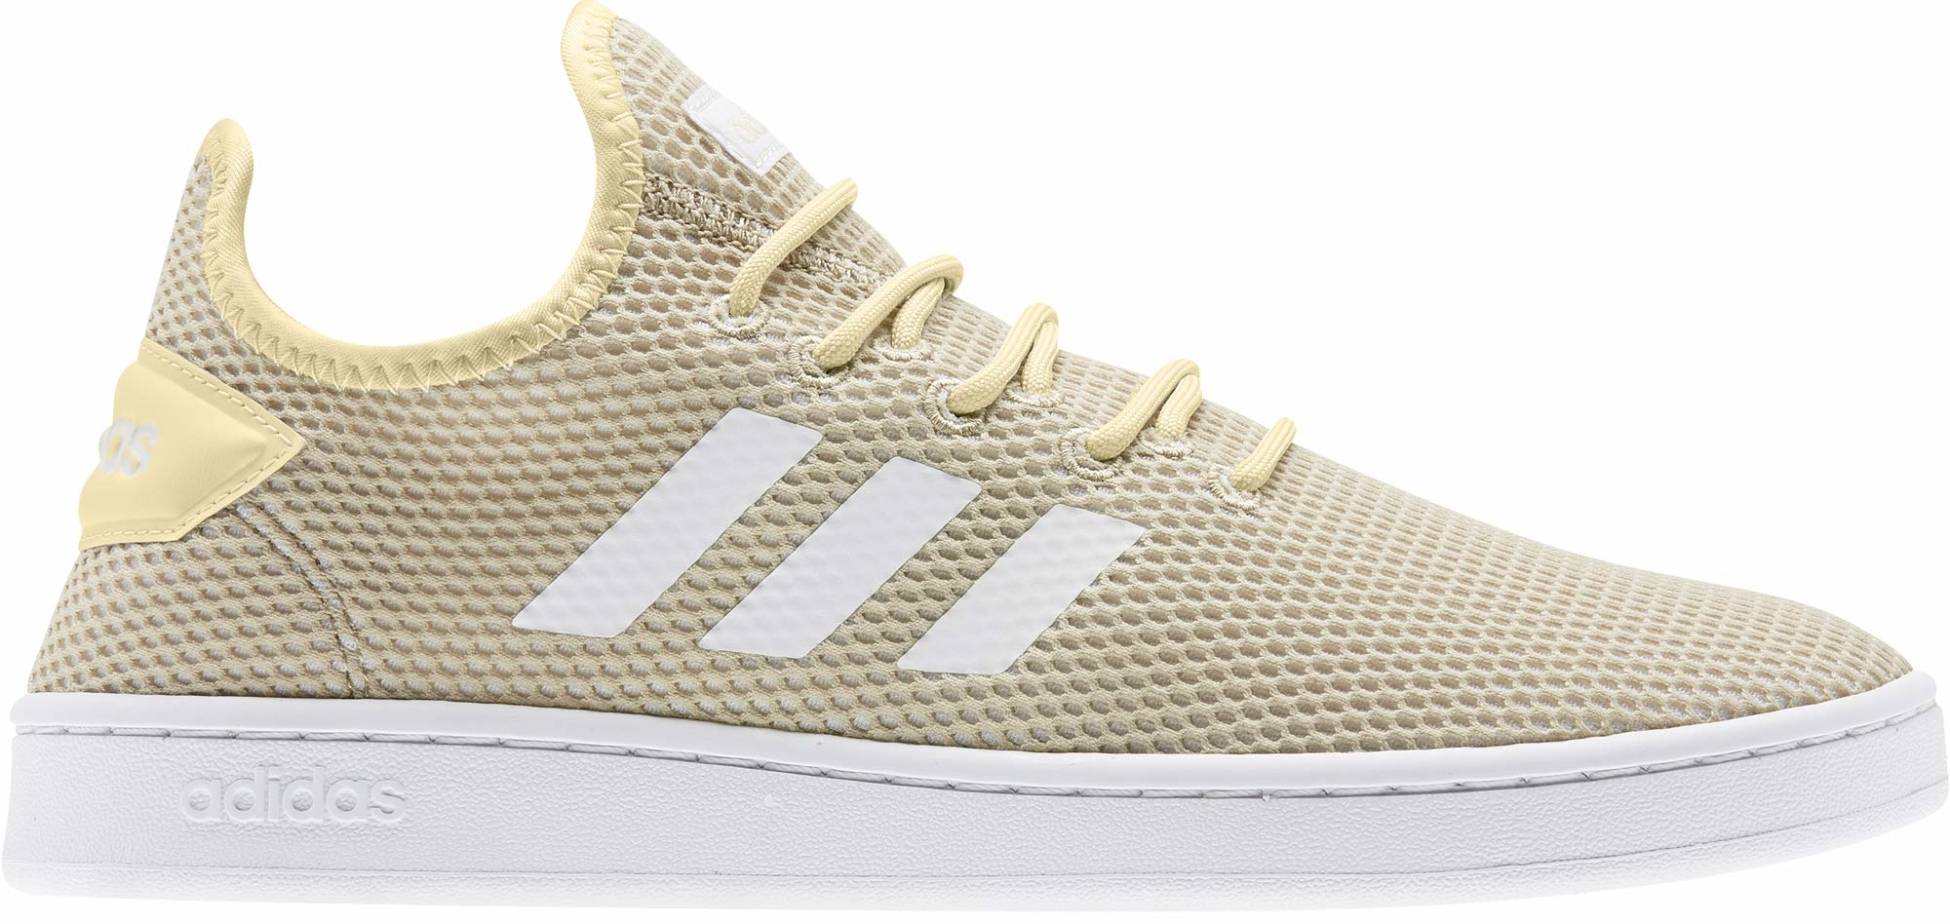 Adidas Court Adapt sneakers in 4 colors (only $21) | RunRepeat